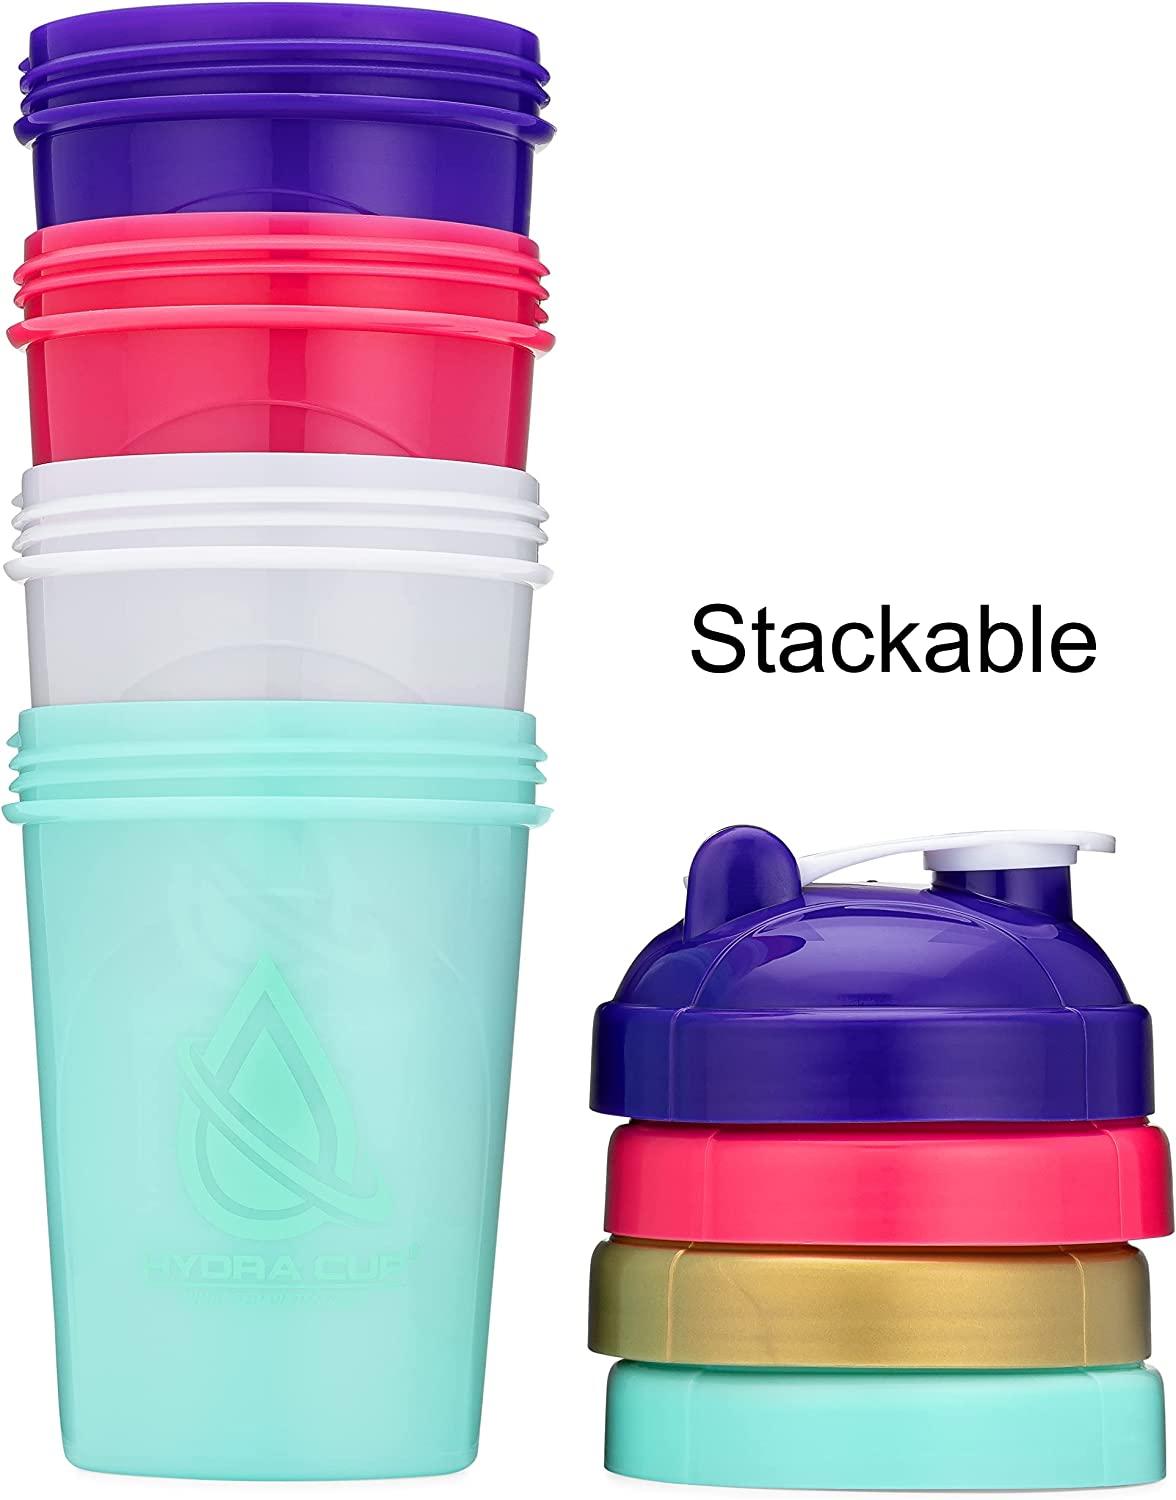 HYDRACUP 20-Oz Shaker Cups  Protein Shaker 4-Pack w/ Wire Whisk